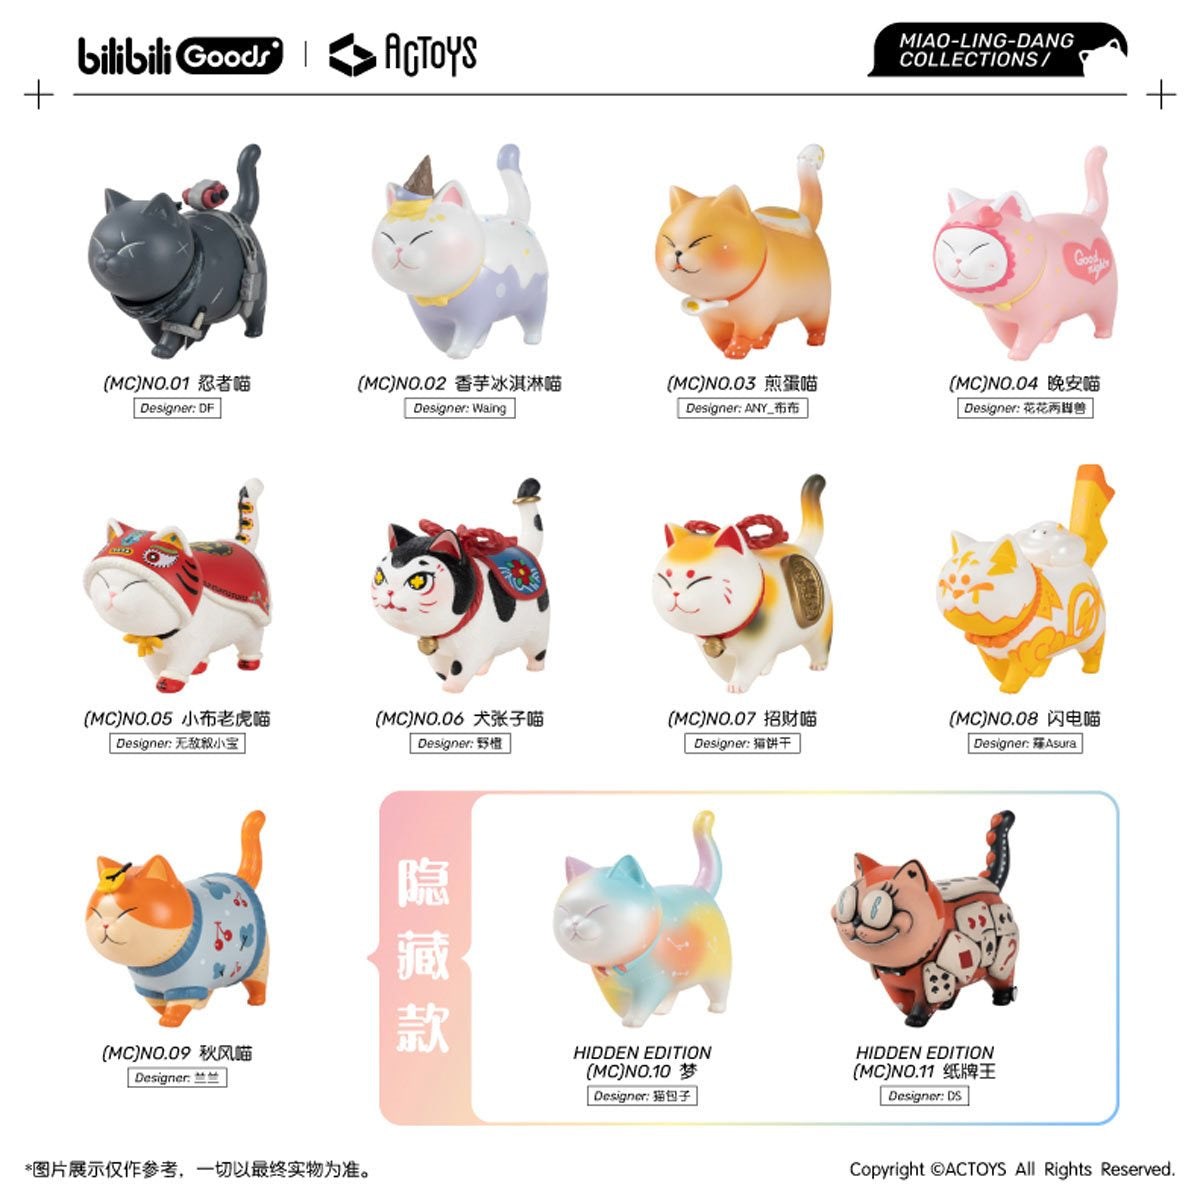 Blind Box - Meow - Miao Ling Dang Collections